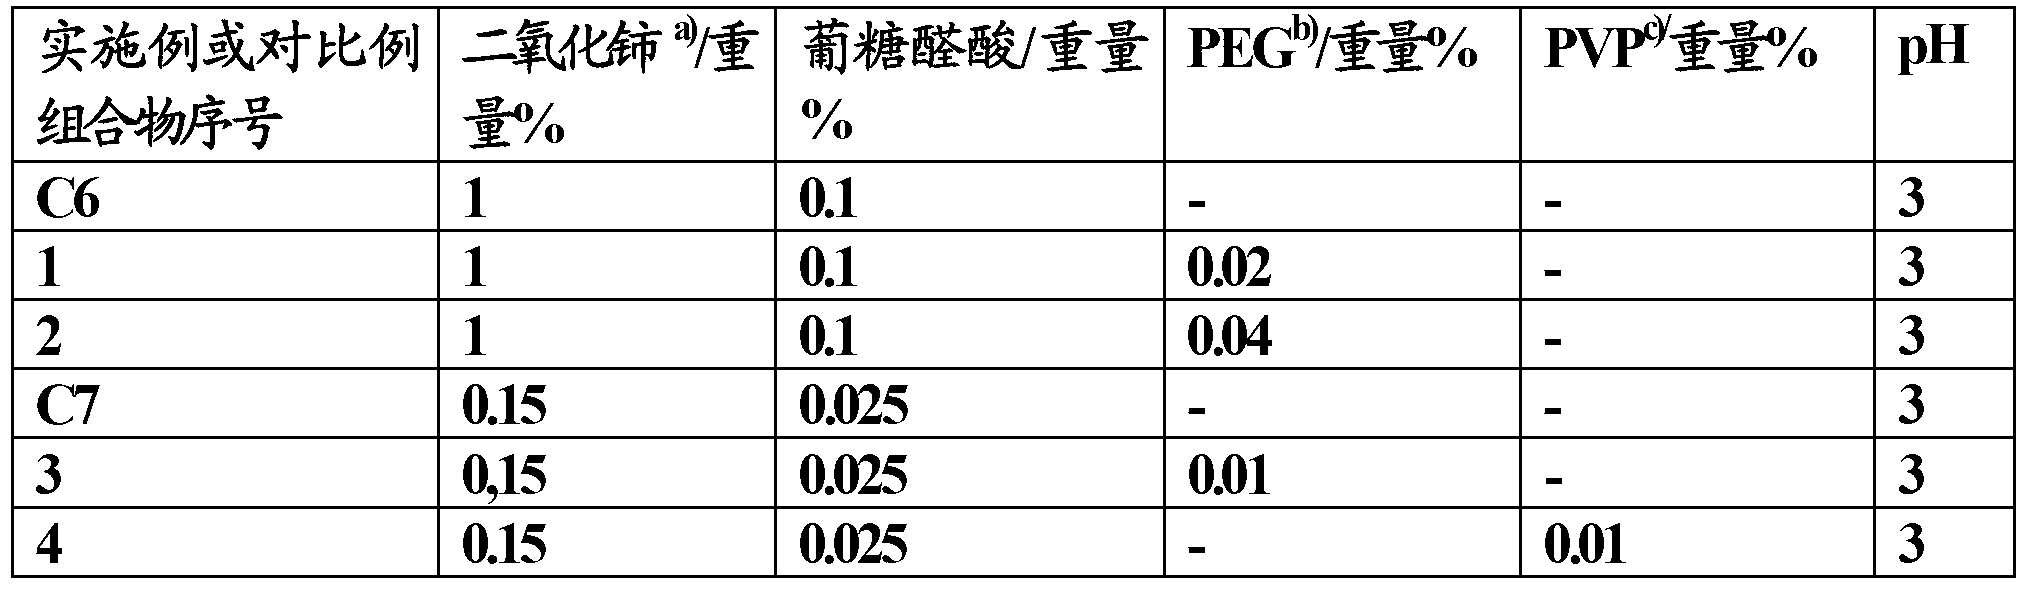 Aqueous polishing composition and process for chemically mechanically polishing substrate materials for electrical, mechanical and optical devices